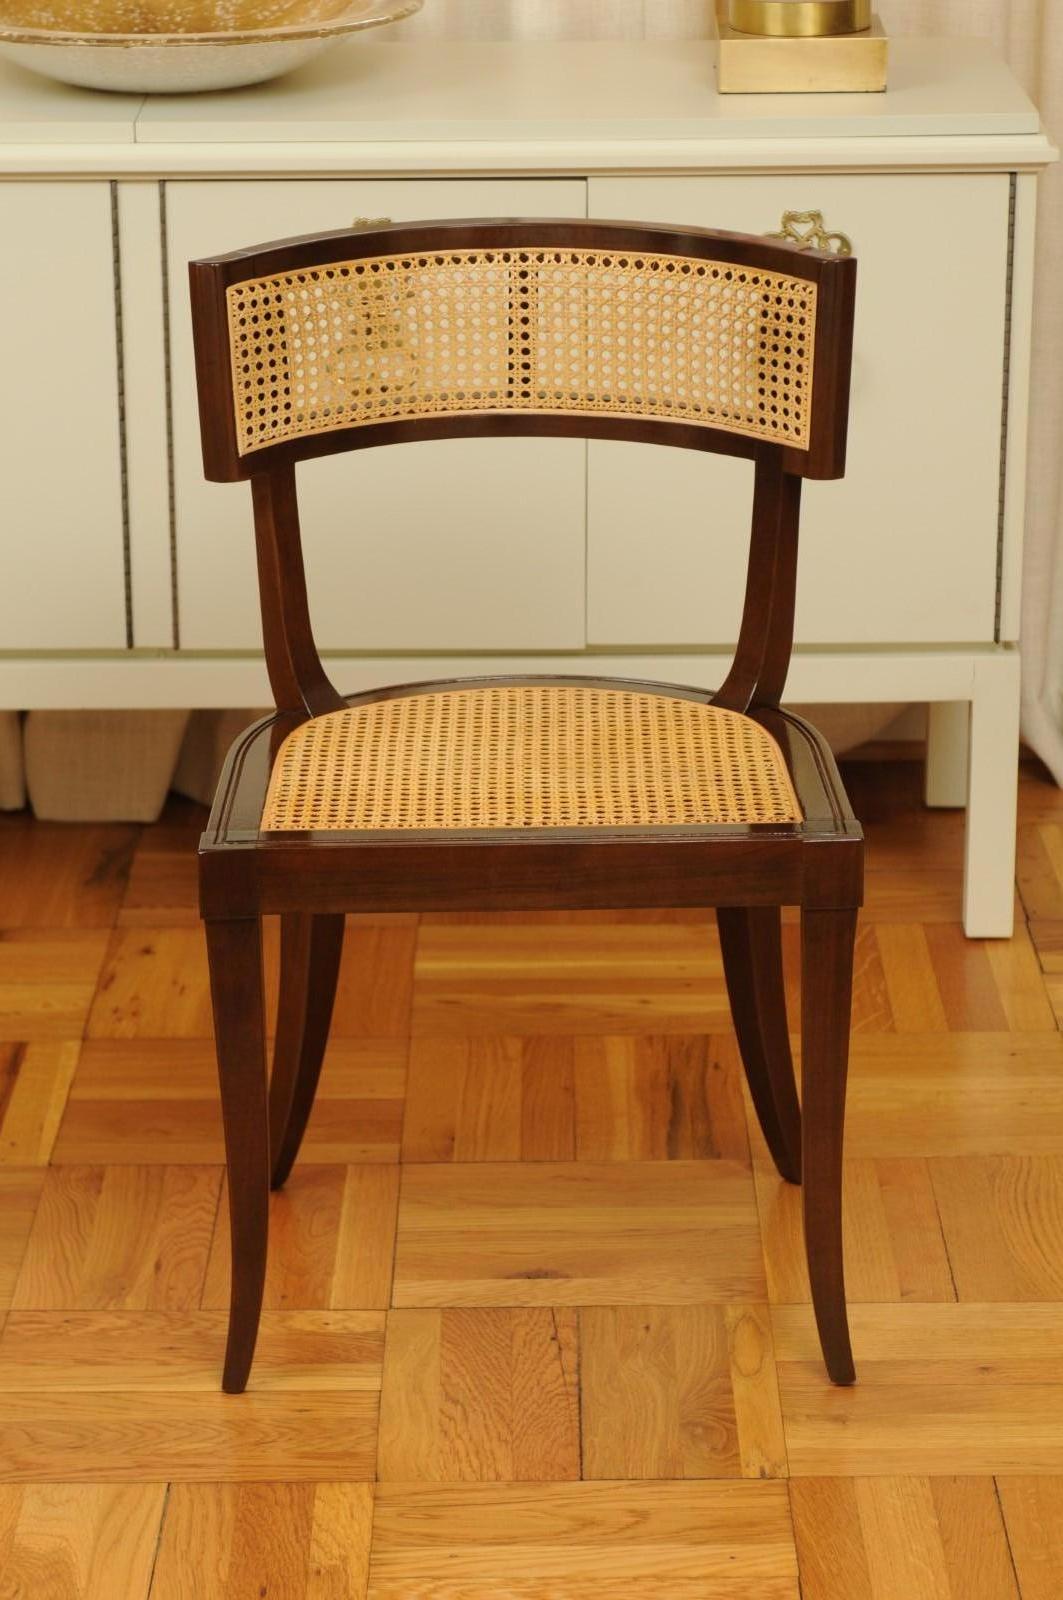 Exquisite Set of 8 Klismos Cane Dining Chairs by Baker, circa 1958, Cane Seats In Excellent Condition For Sale In Atlanta, GA